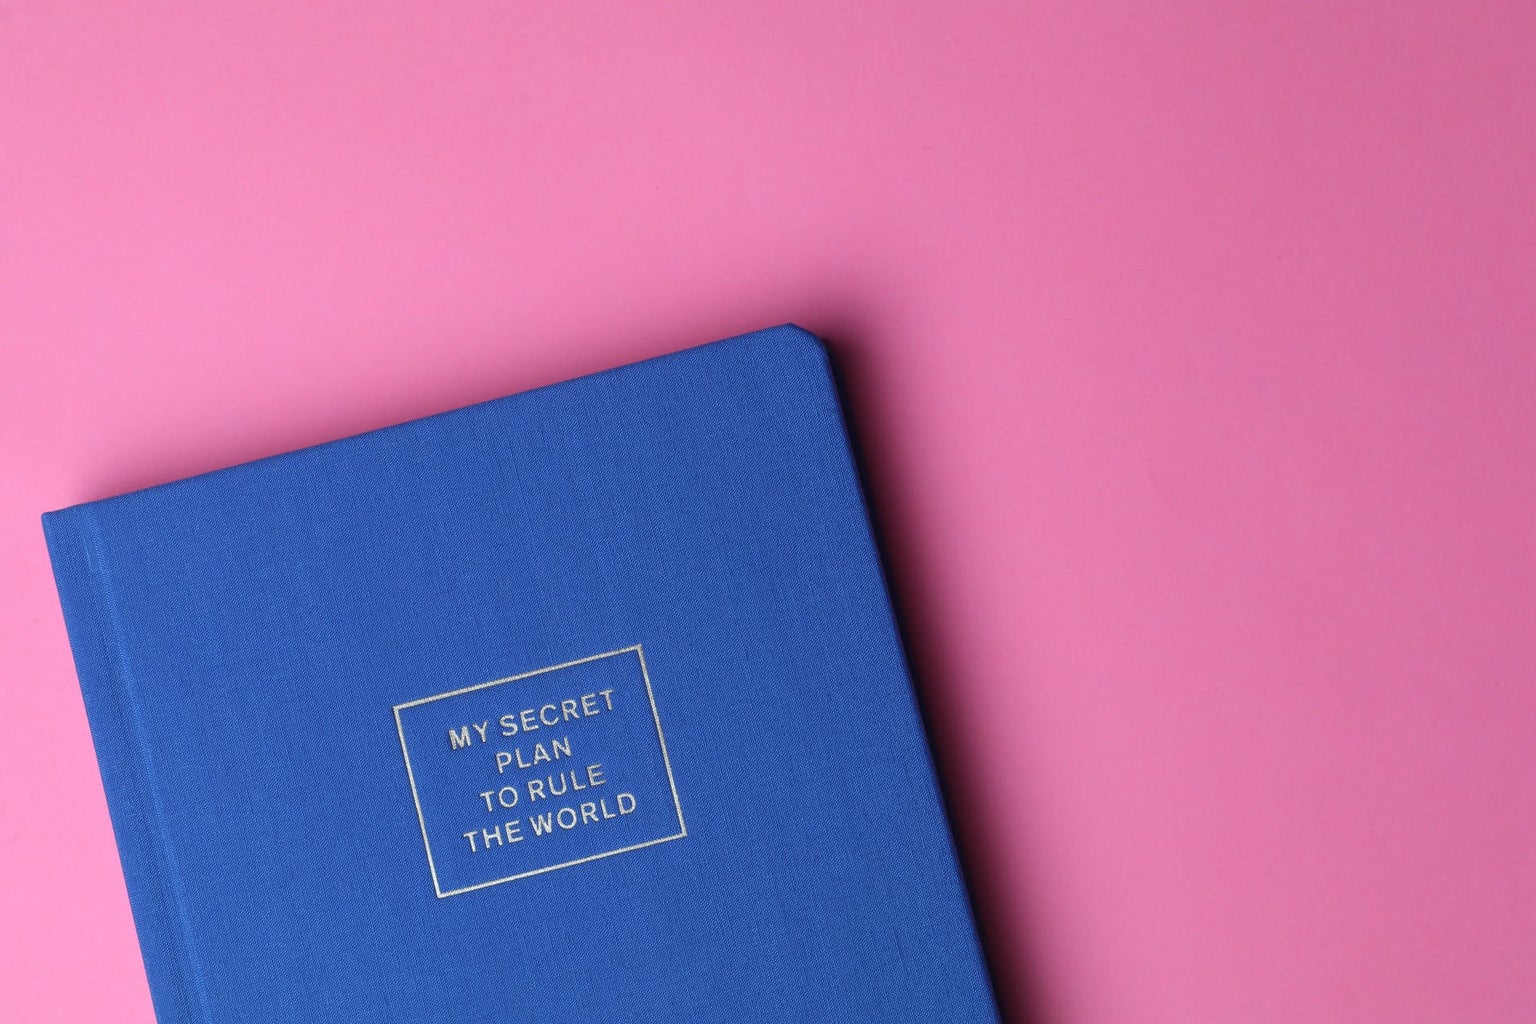 blue notebook saying my secret plan to rule the world on cover with pink background